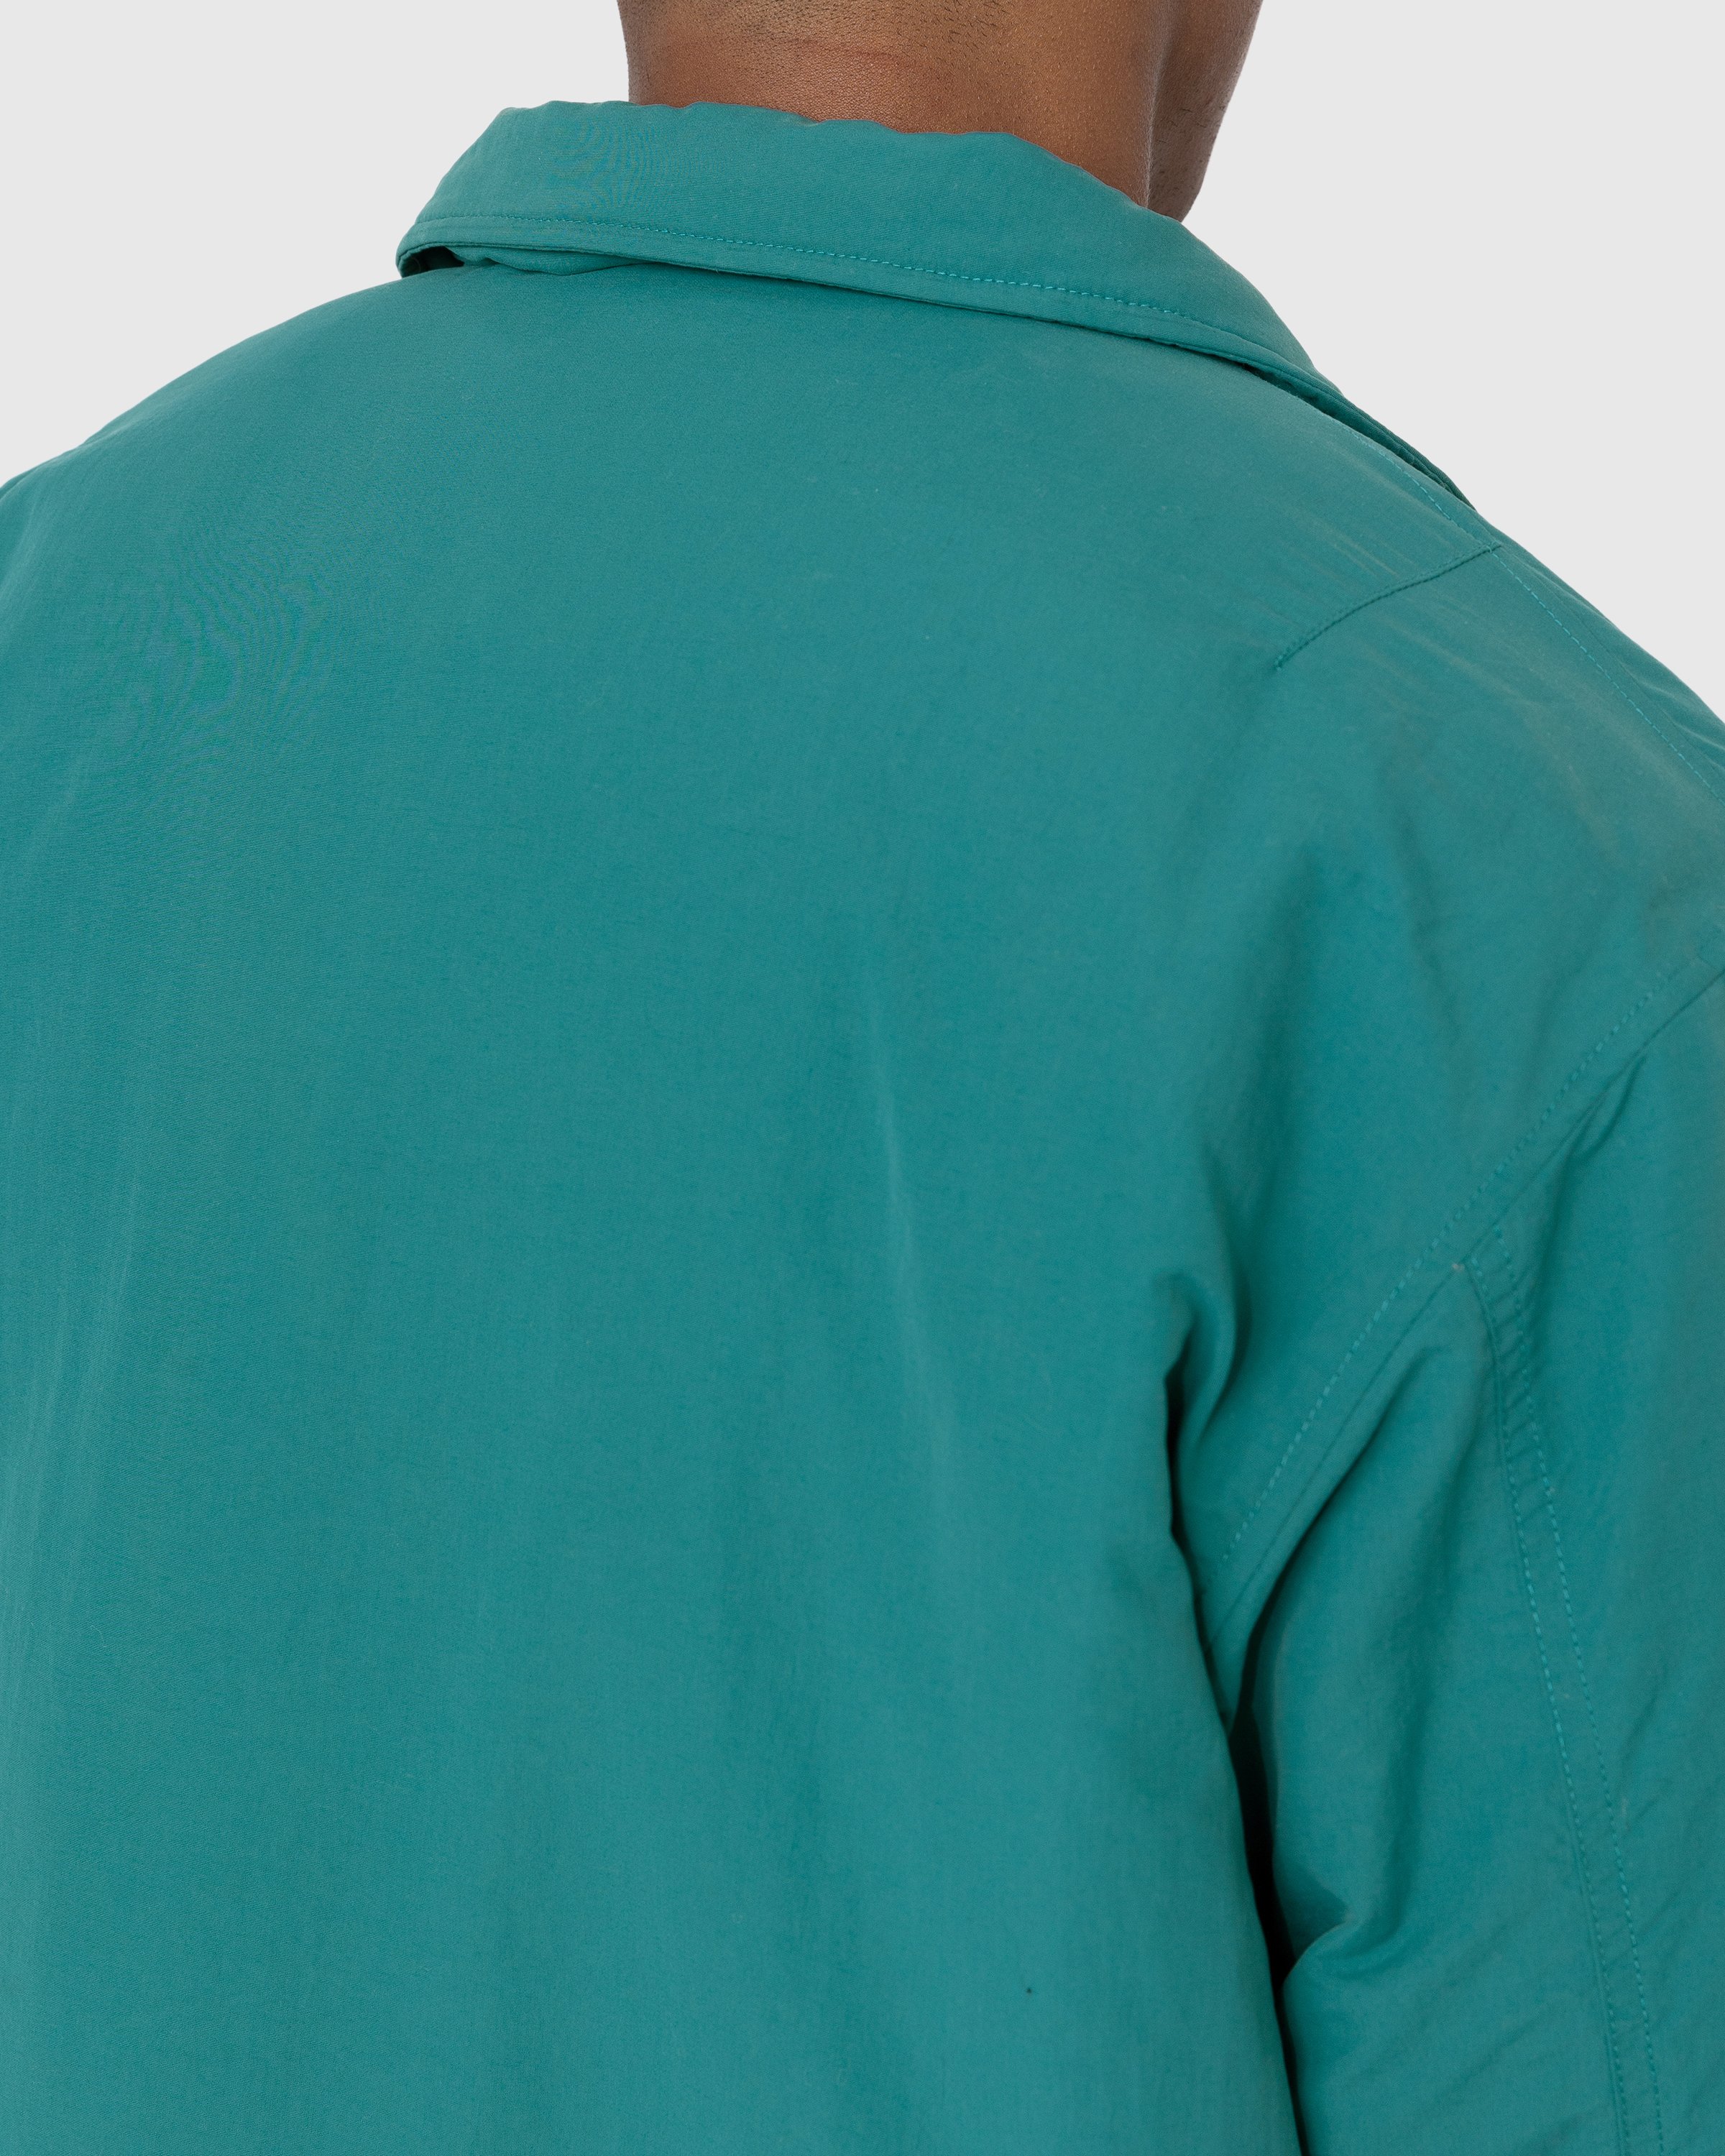 Highsnobiety - Insulated Coach Jacket Sea Green - Clothing - Green - Image 7